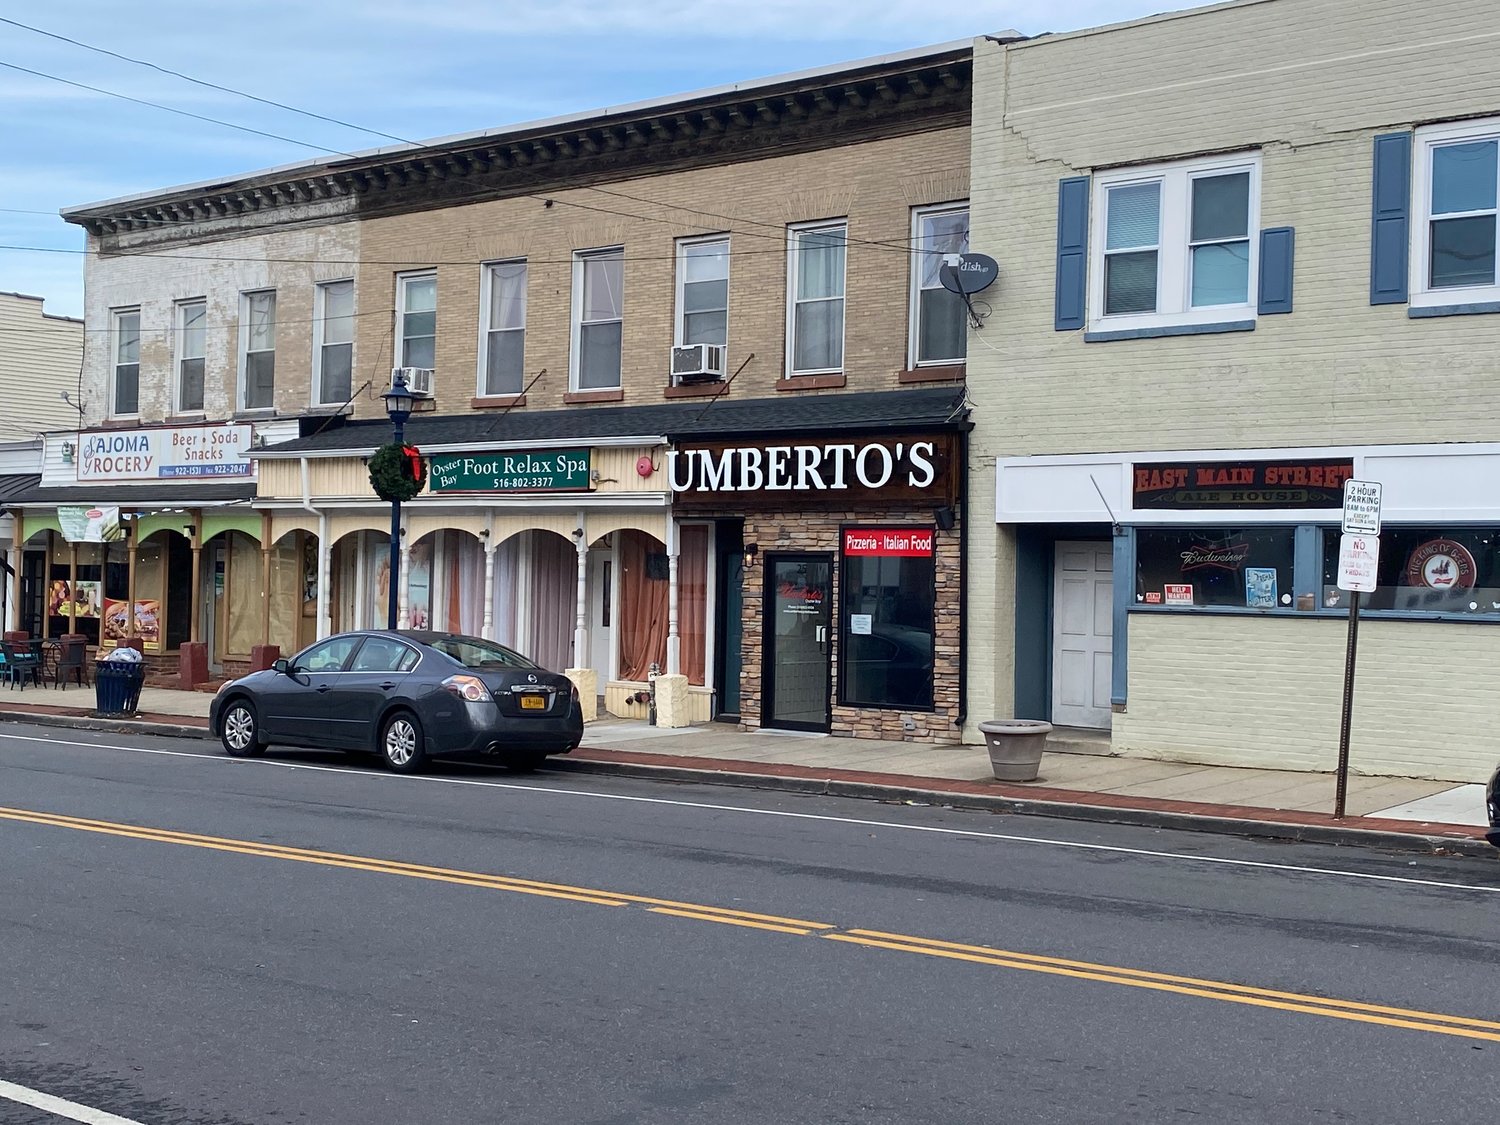 Several stores have recently opened in the hamlet, including Umberto’s, indicating that there is a renaissance of sorts taking place.